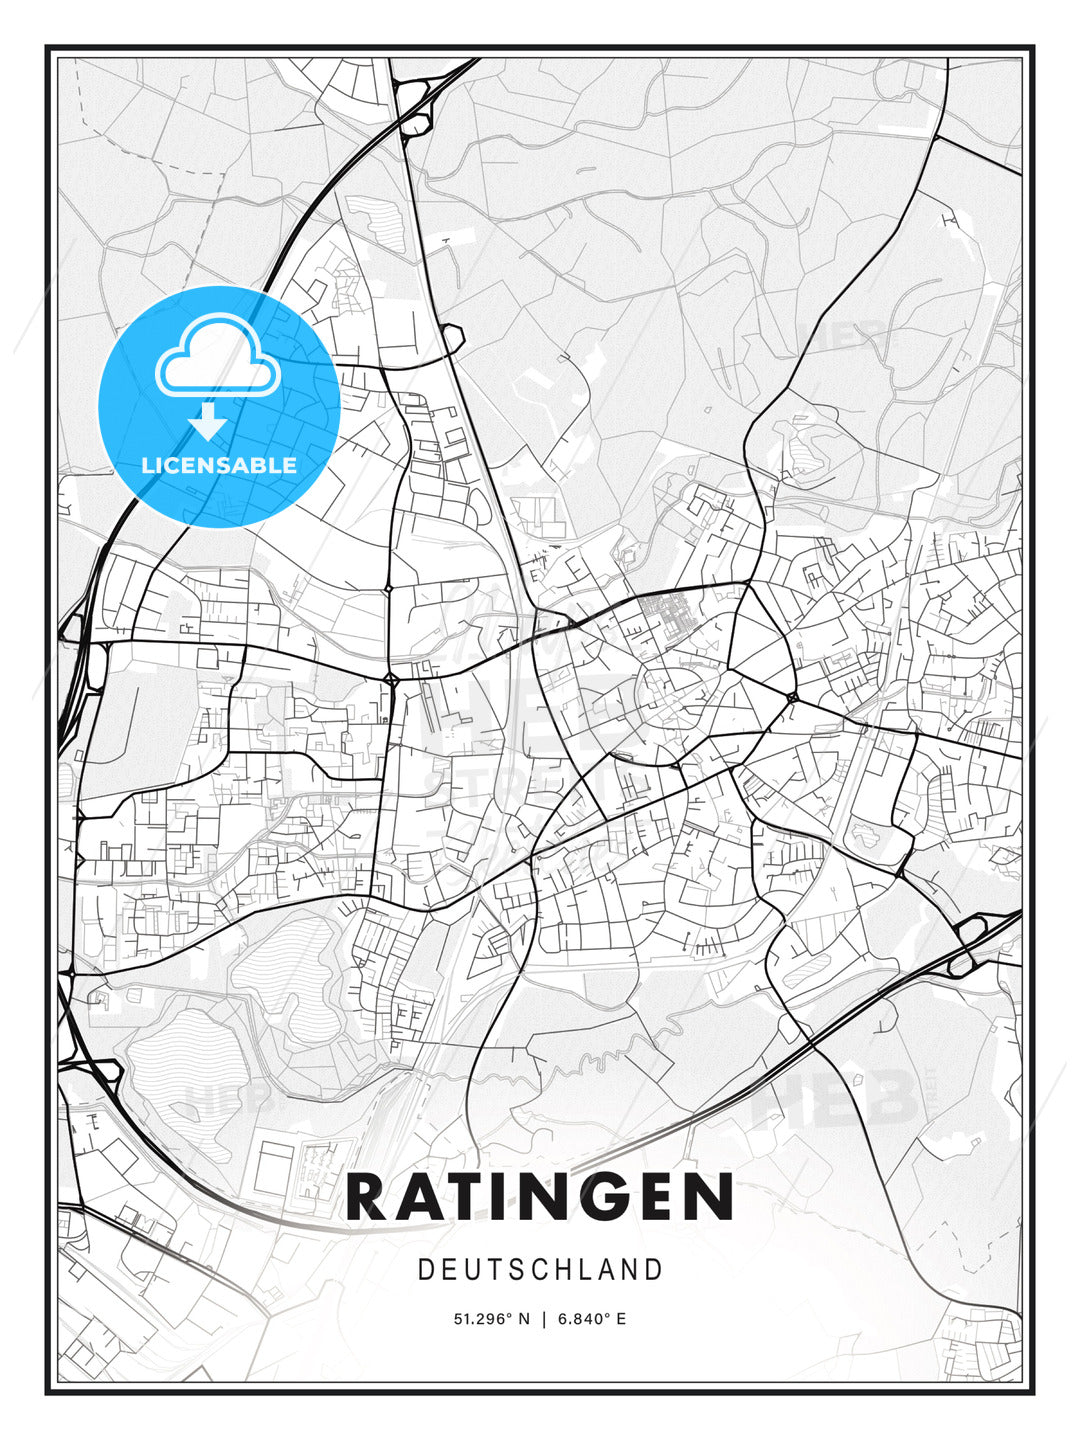 Ratingen, Germany, Modern Print Template in Various Formats - HEBSTREITS Sketches